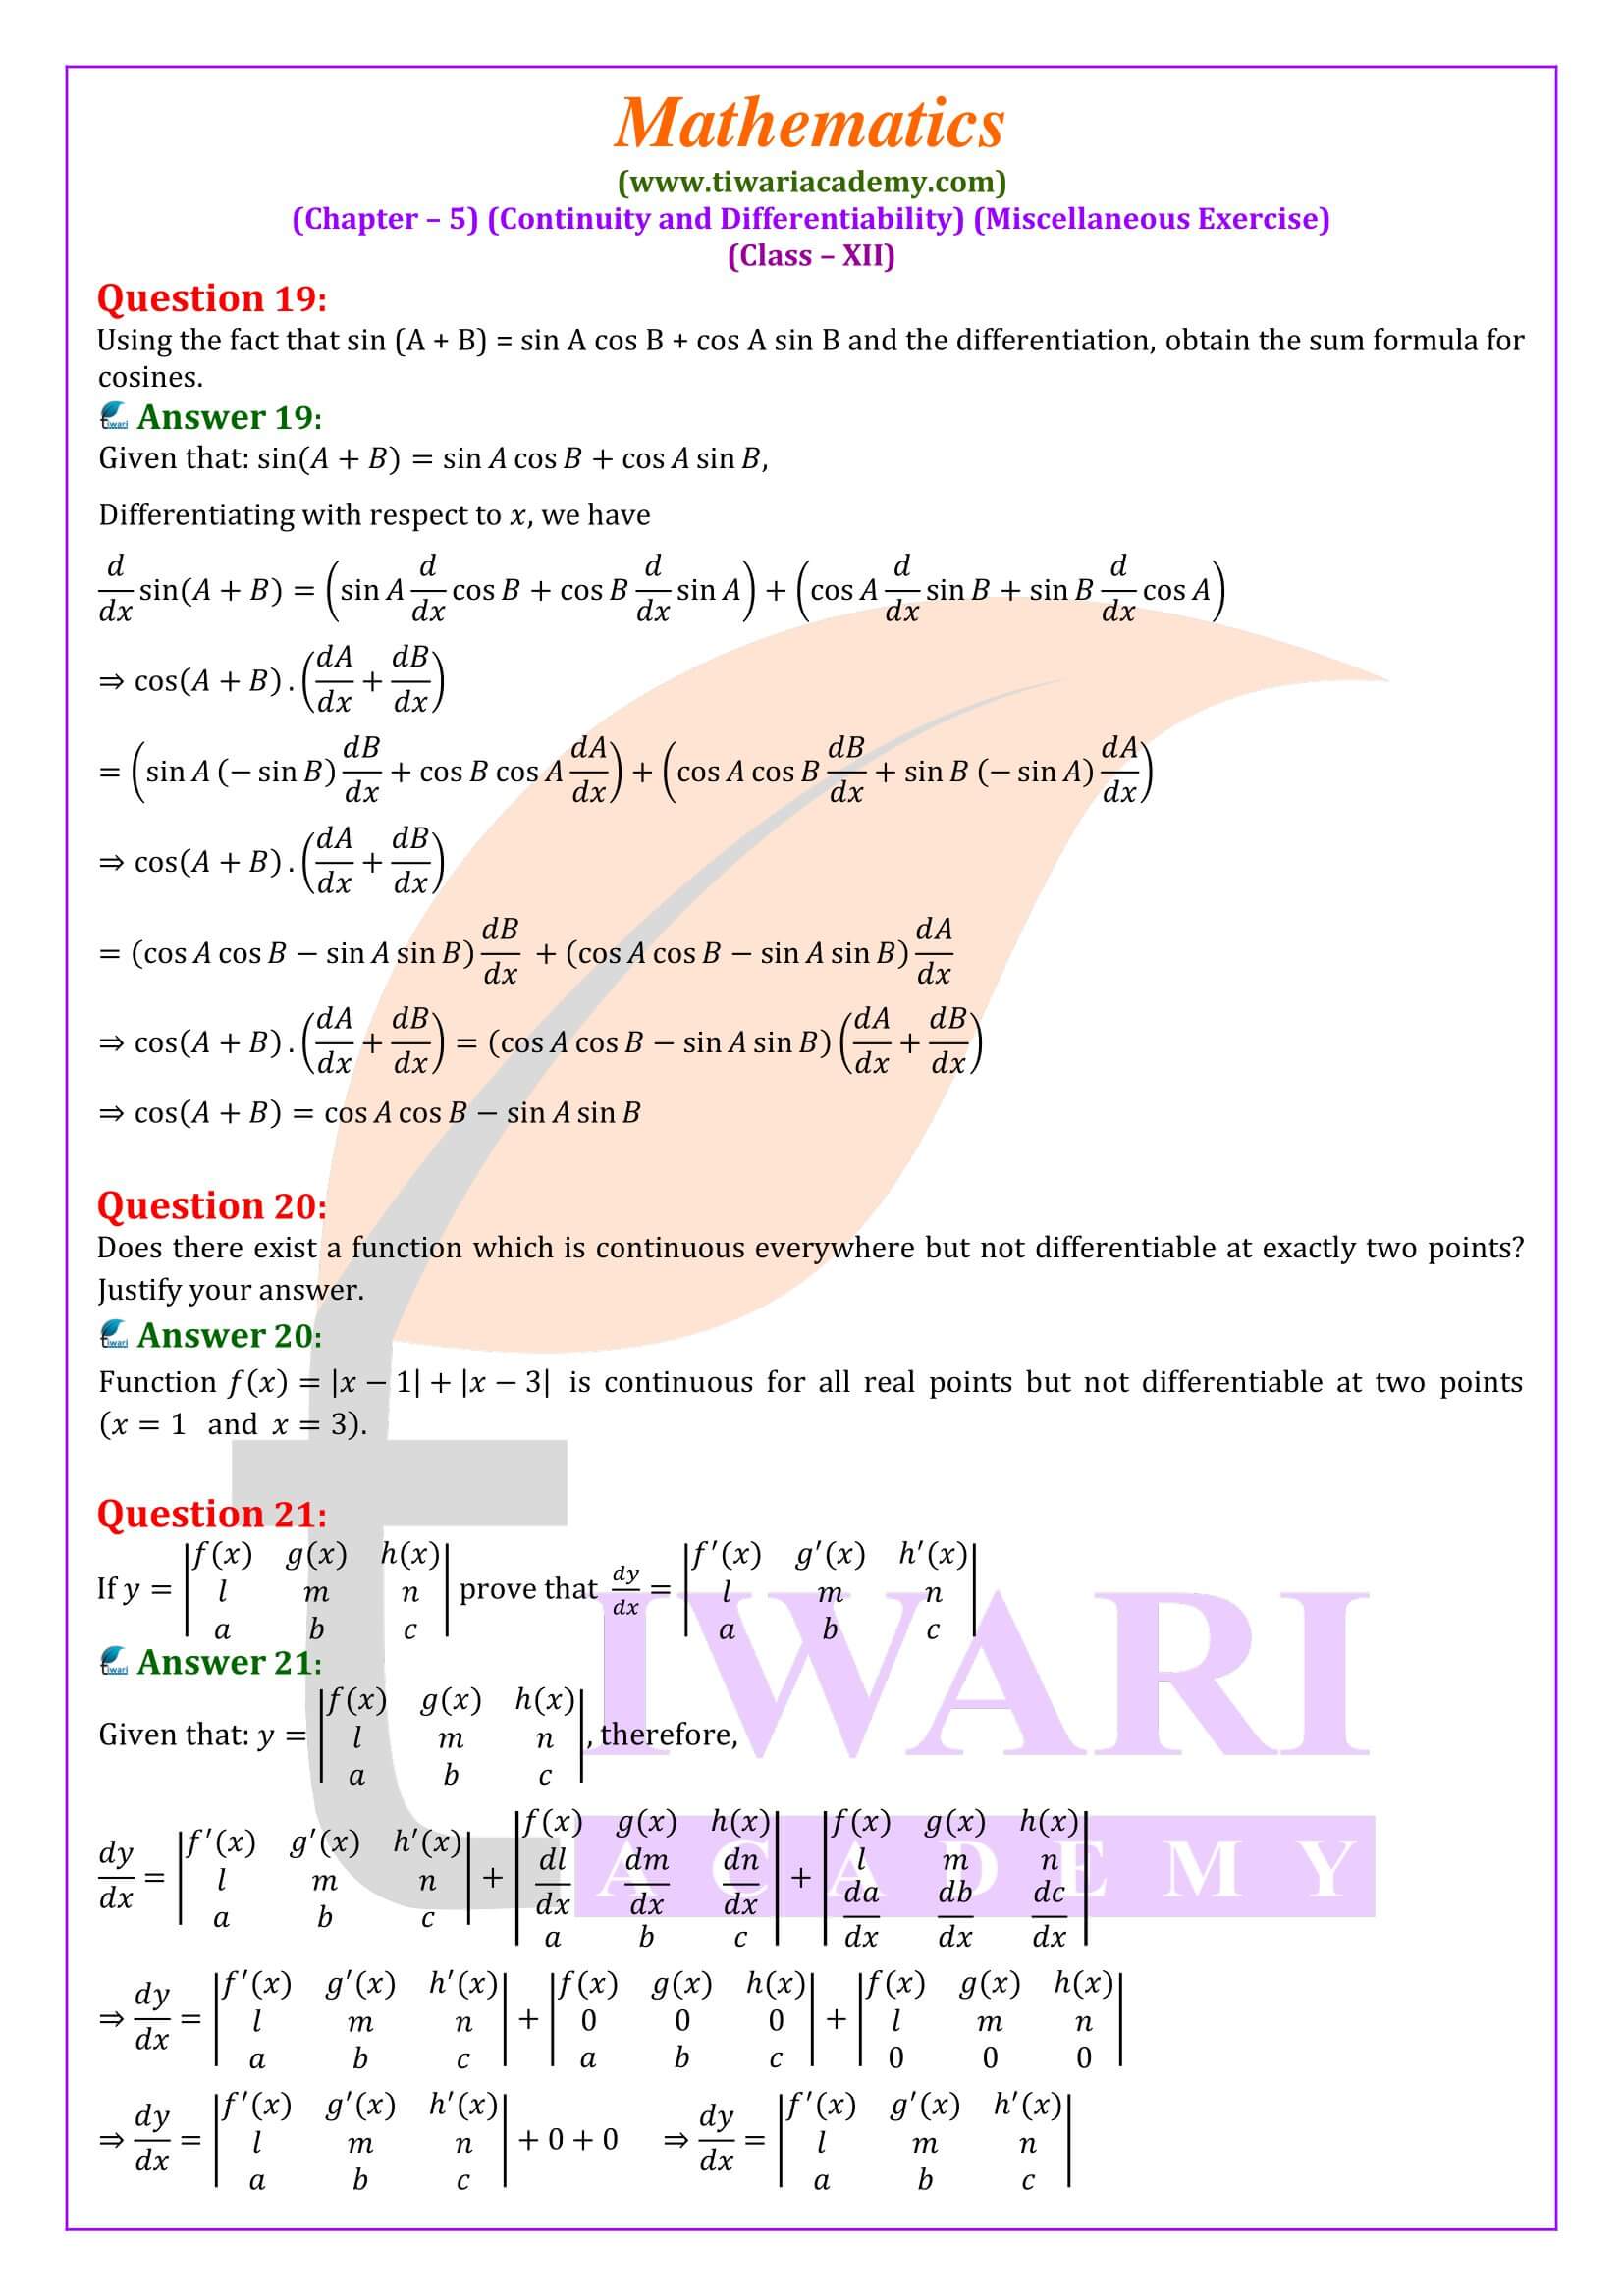 12th Maths misc. ex. 5 guide solution